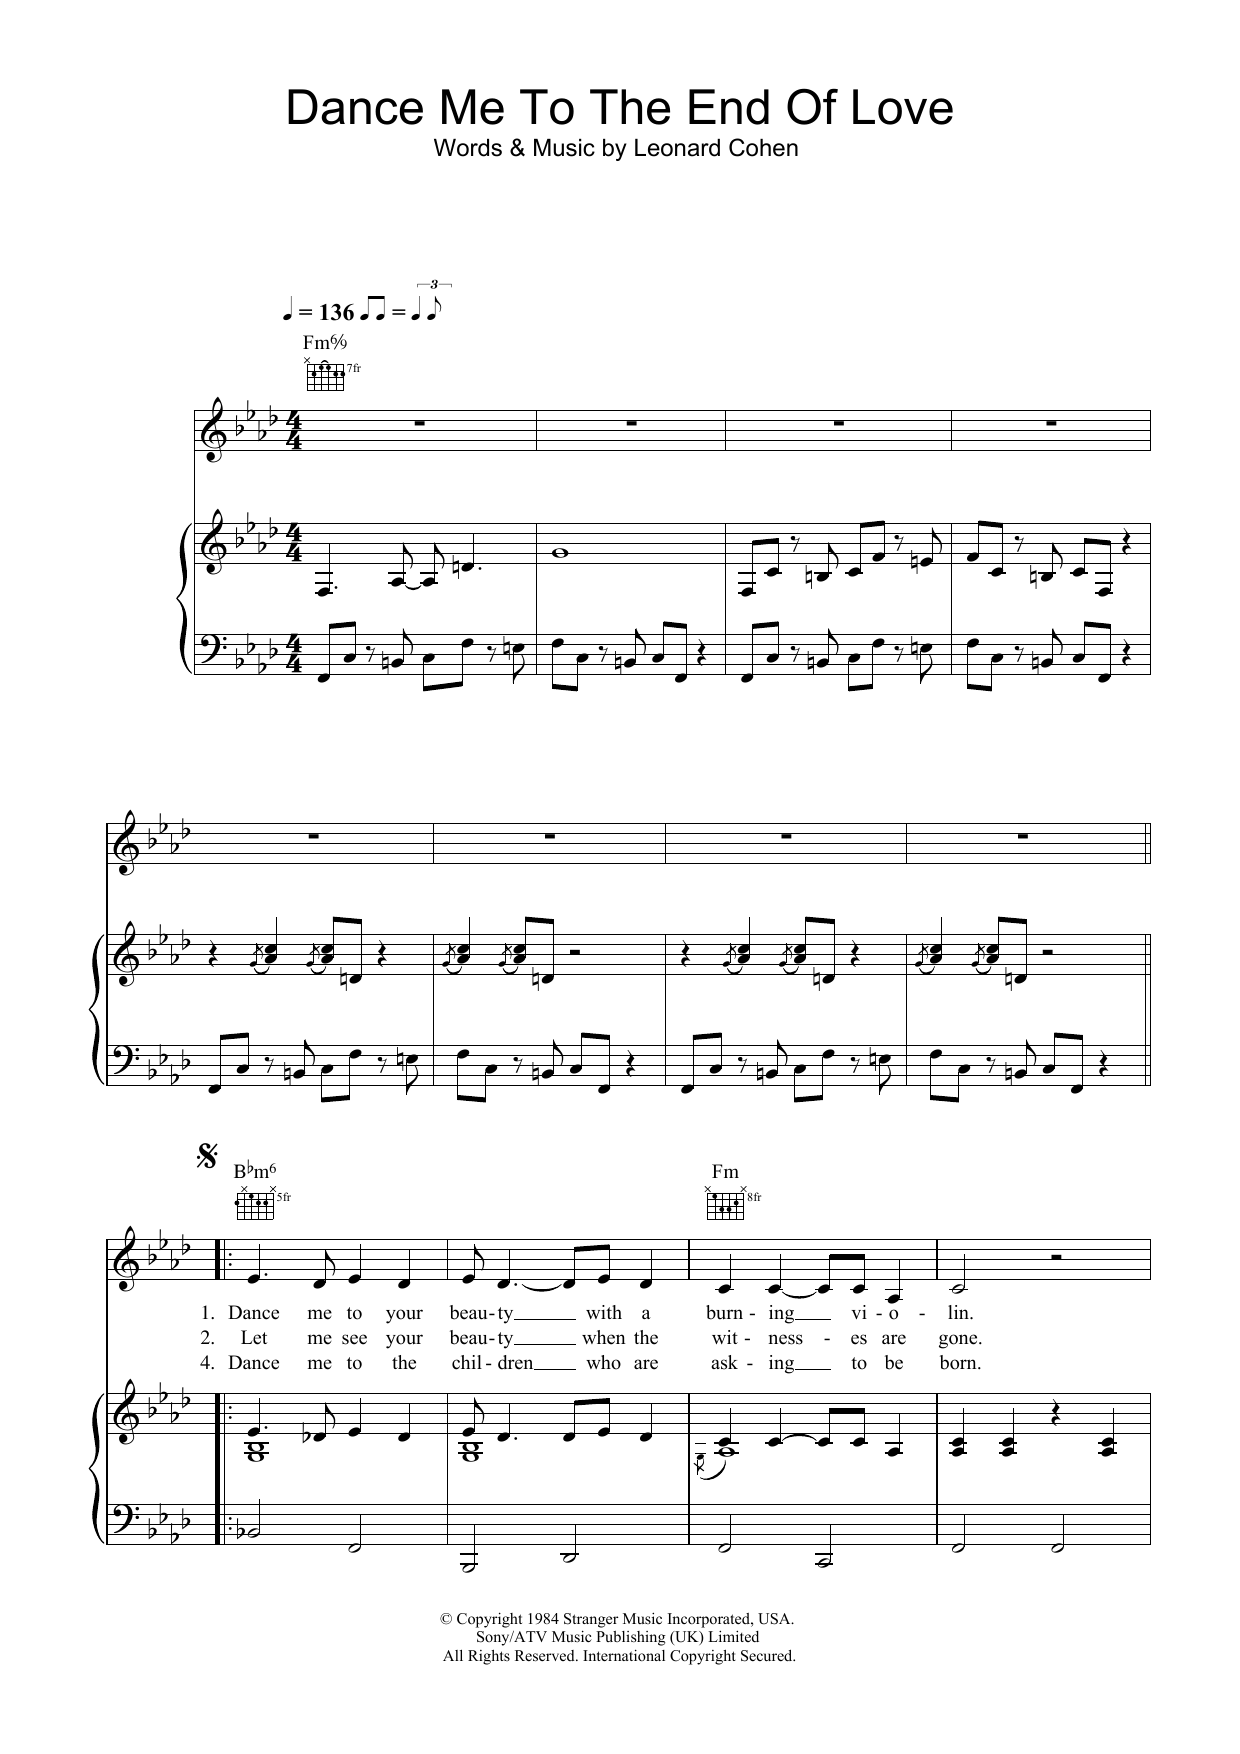 Download Madeleine Peyroux Dance Me To The End Of Love Sheet Music